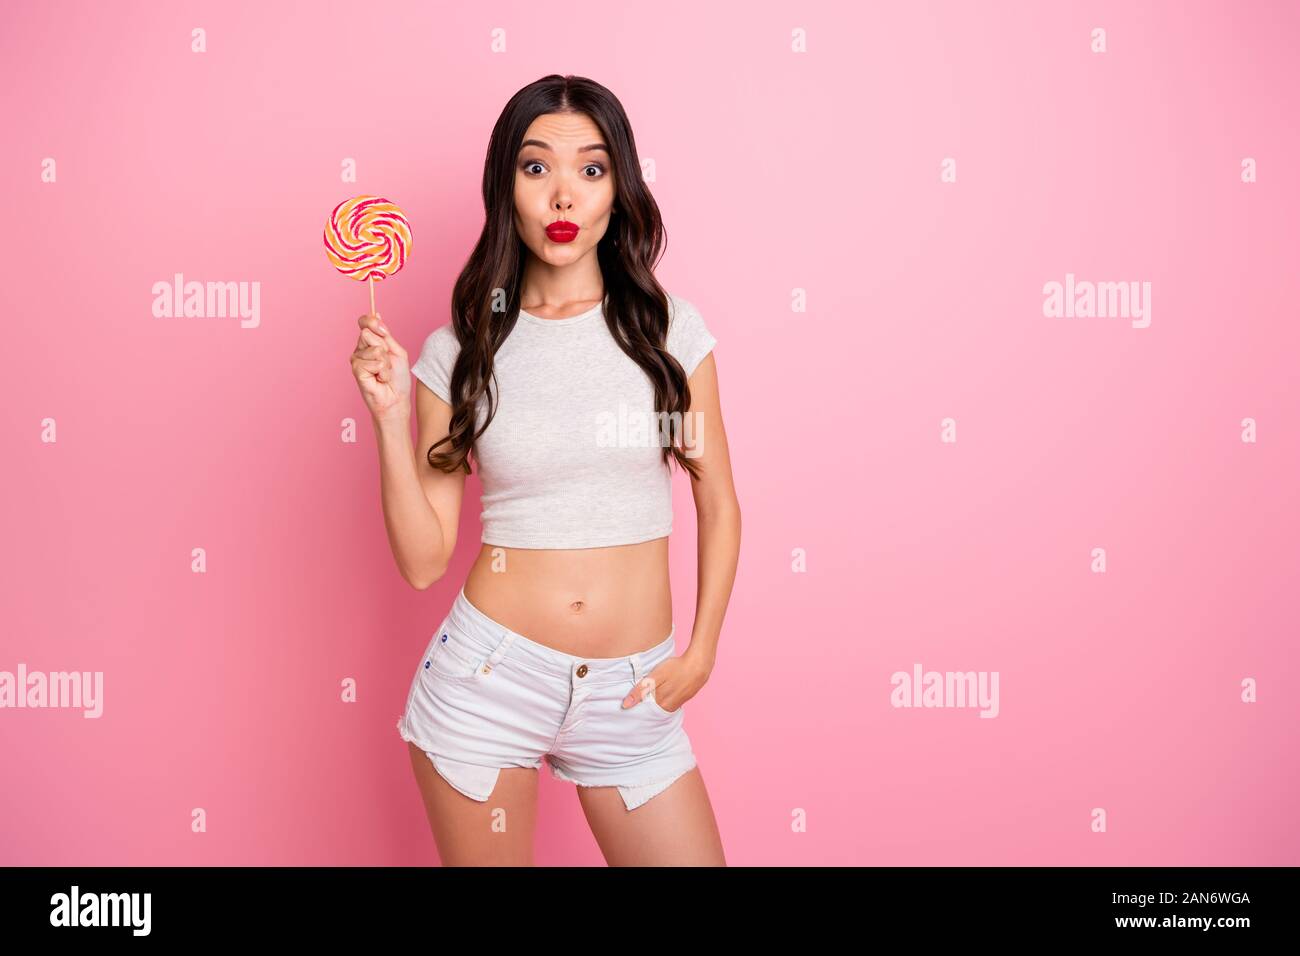 Portrait of her she nice attractive lovely charming amazed cheerful cheery wavy-haired girl licking lolly pop having fun pout lips isolated over pink Stock Photo